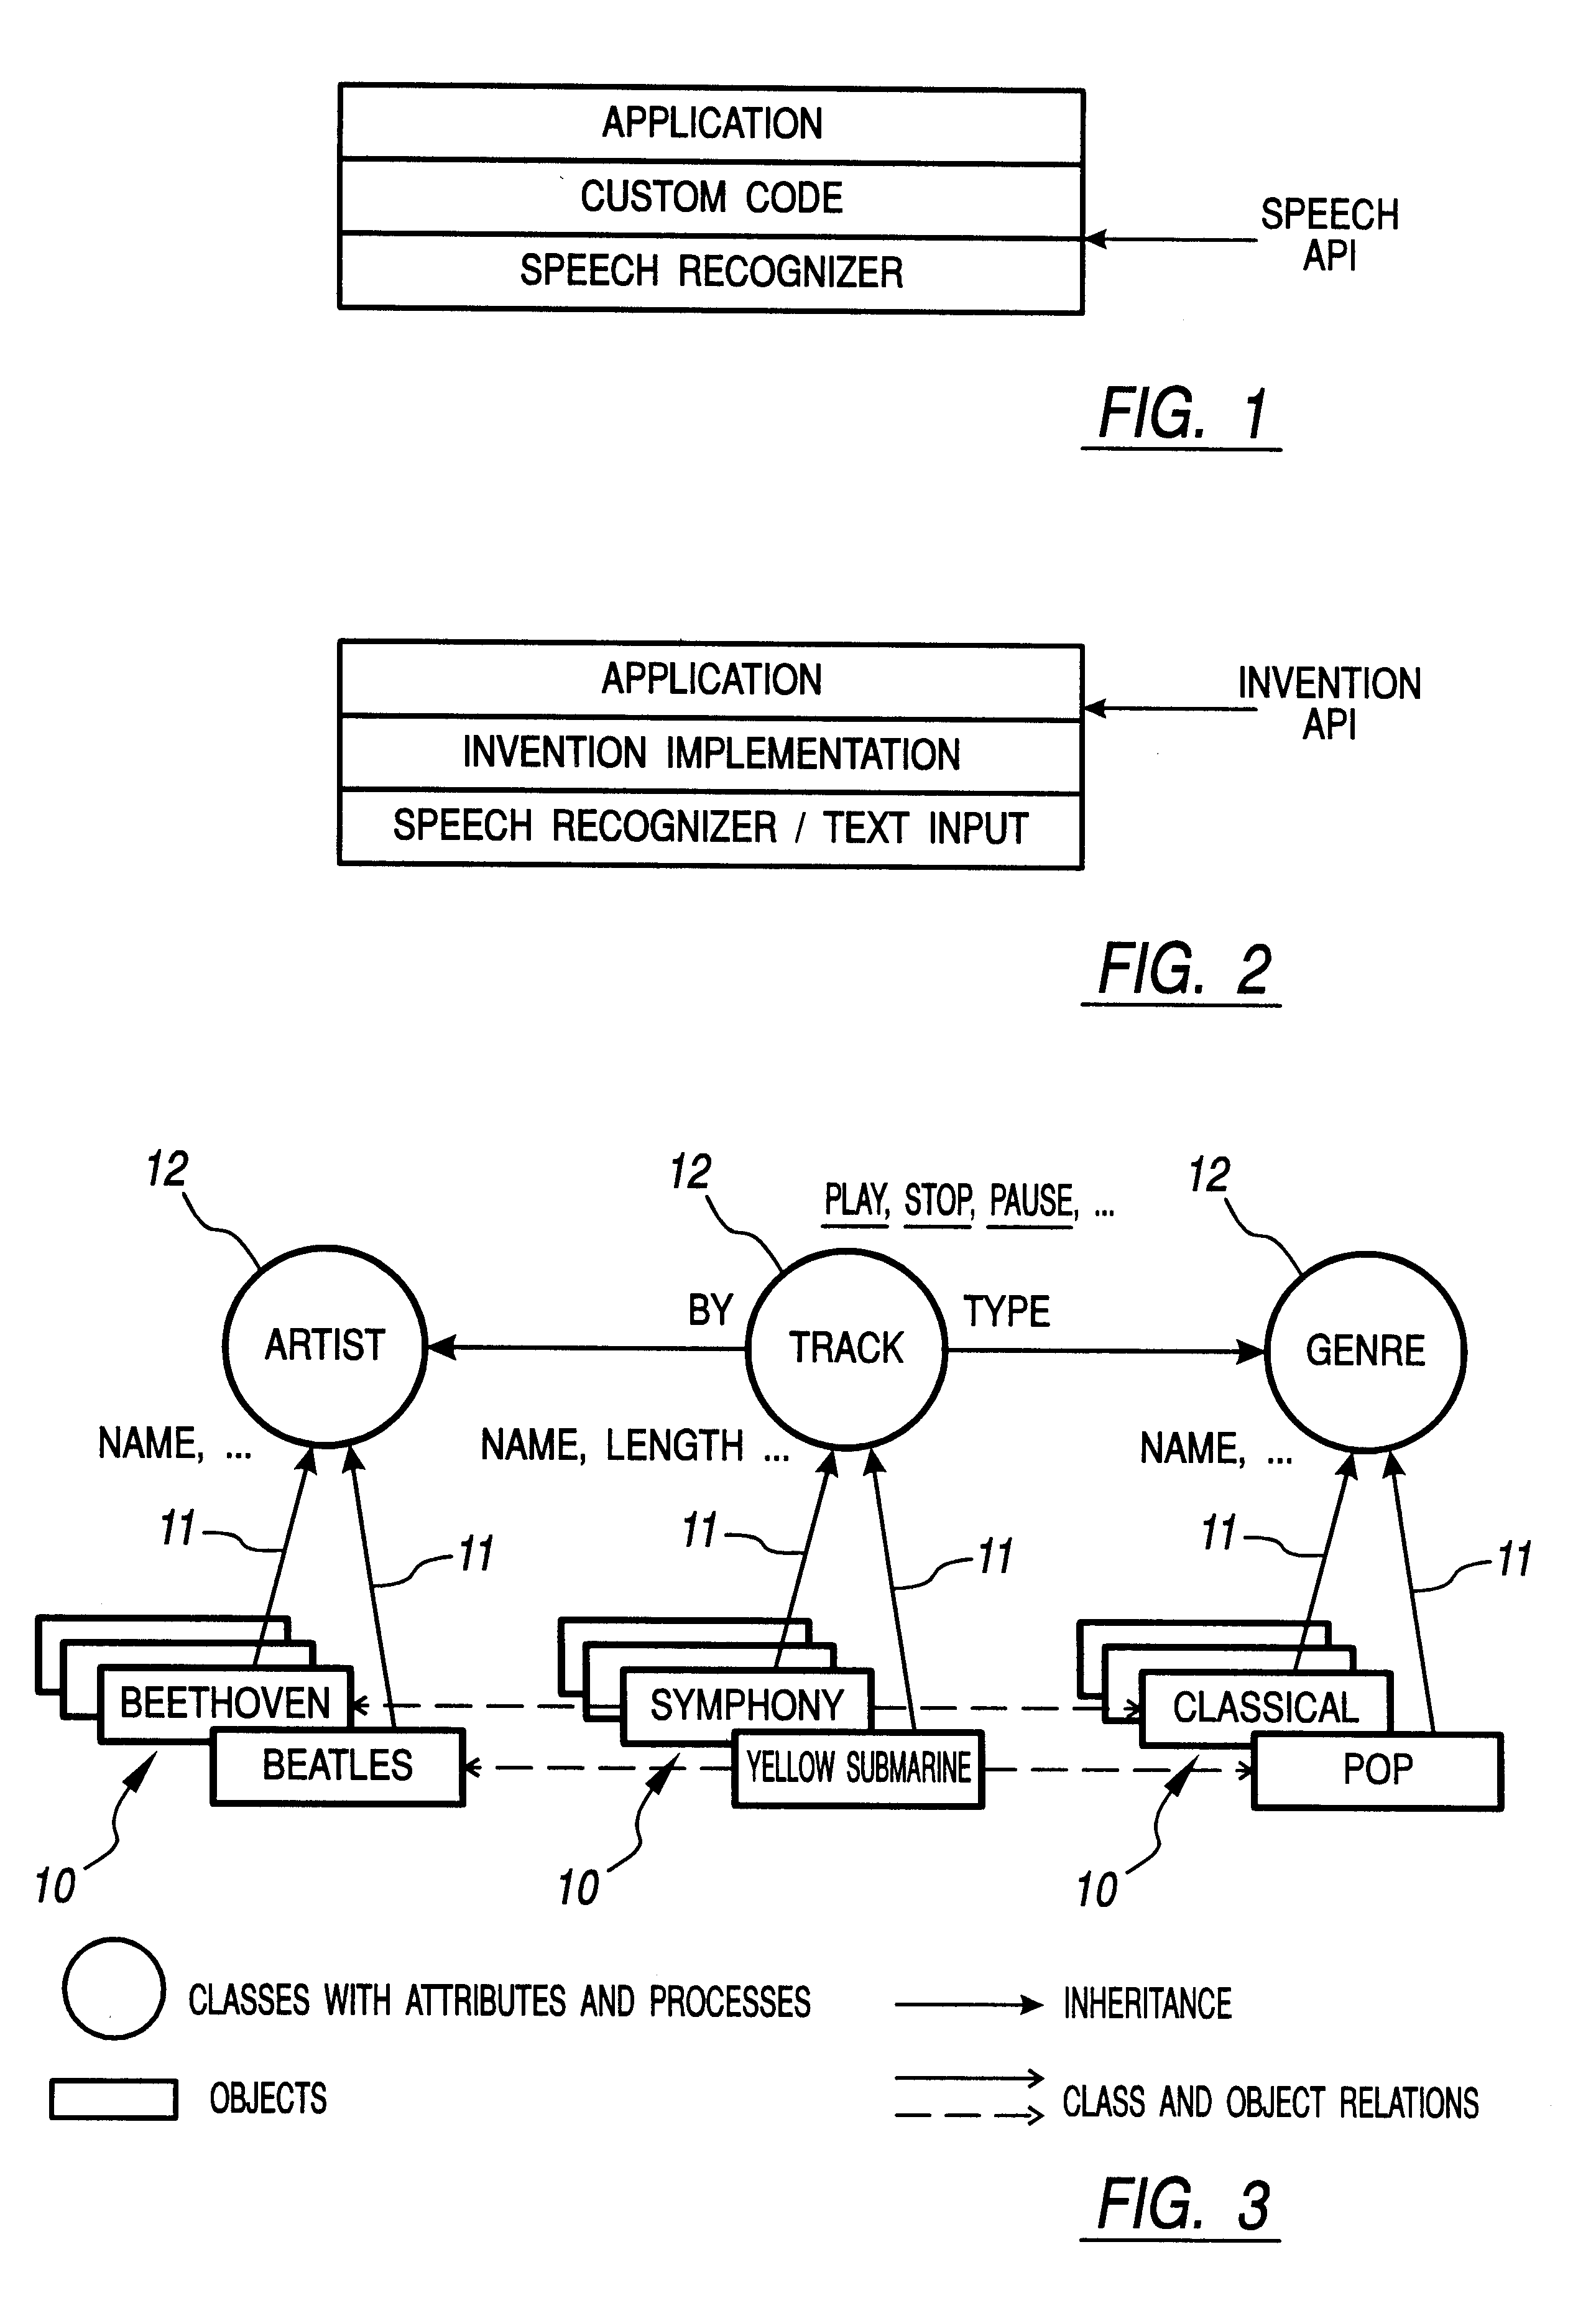 Method and apparatus for separating processing for language-understanding from an application and its functionality